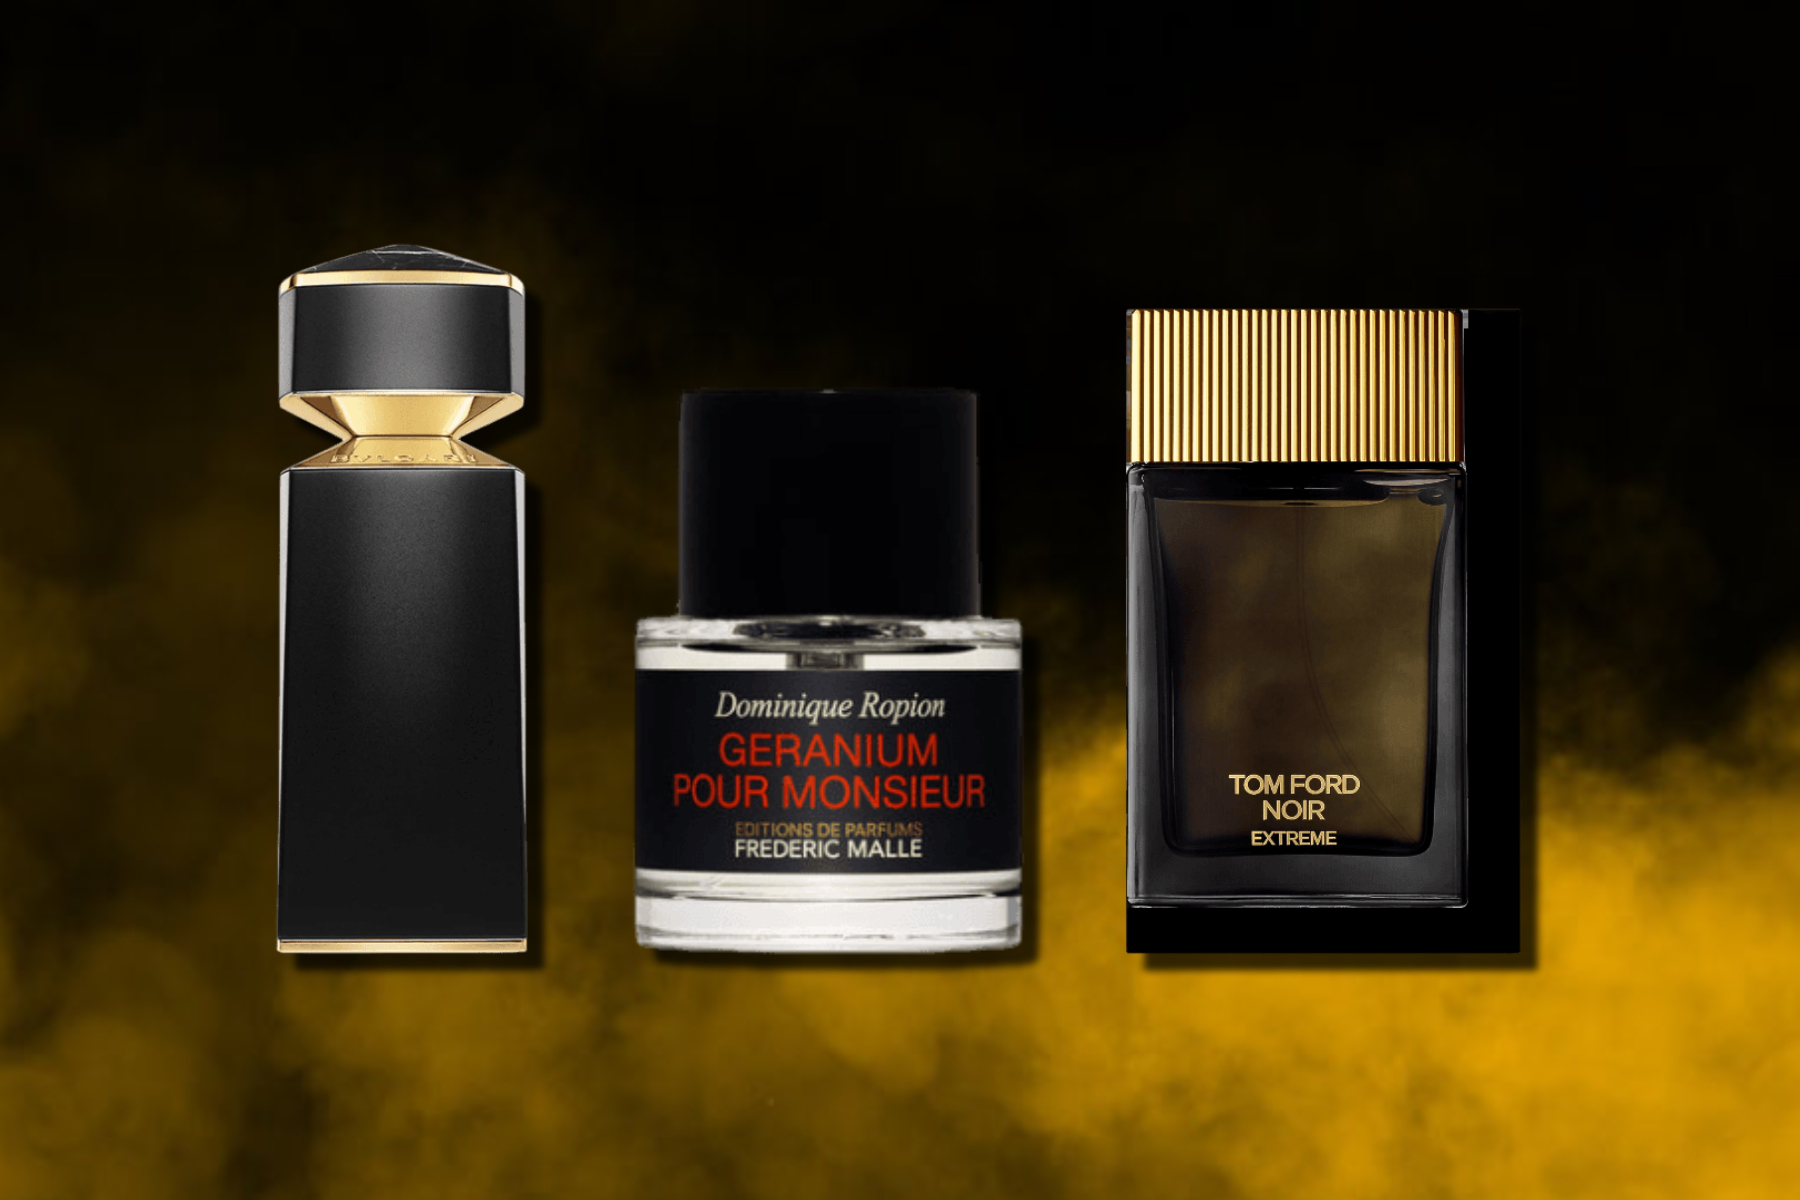 6 of men’s sexiest colognes of the century